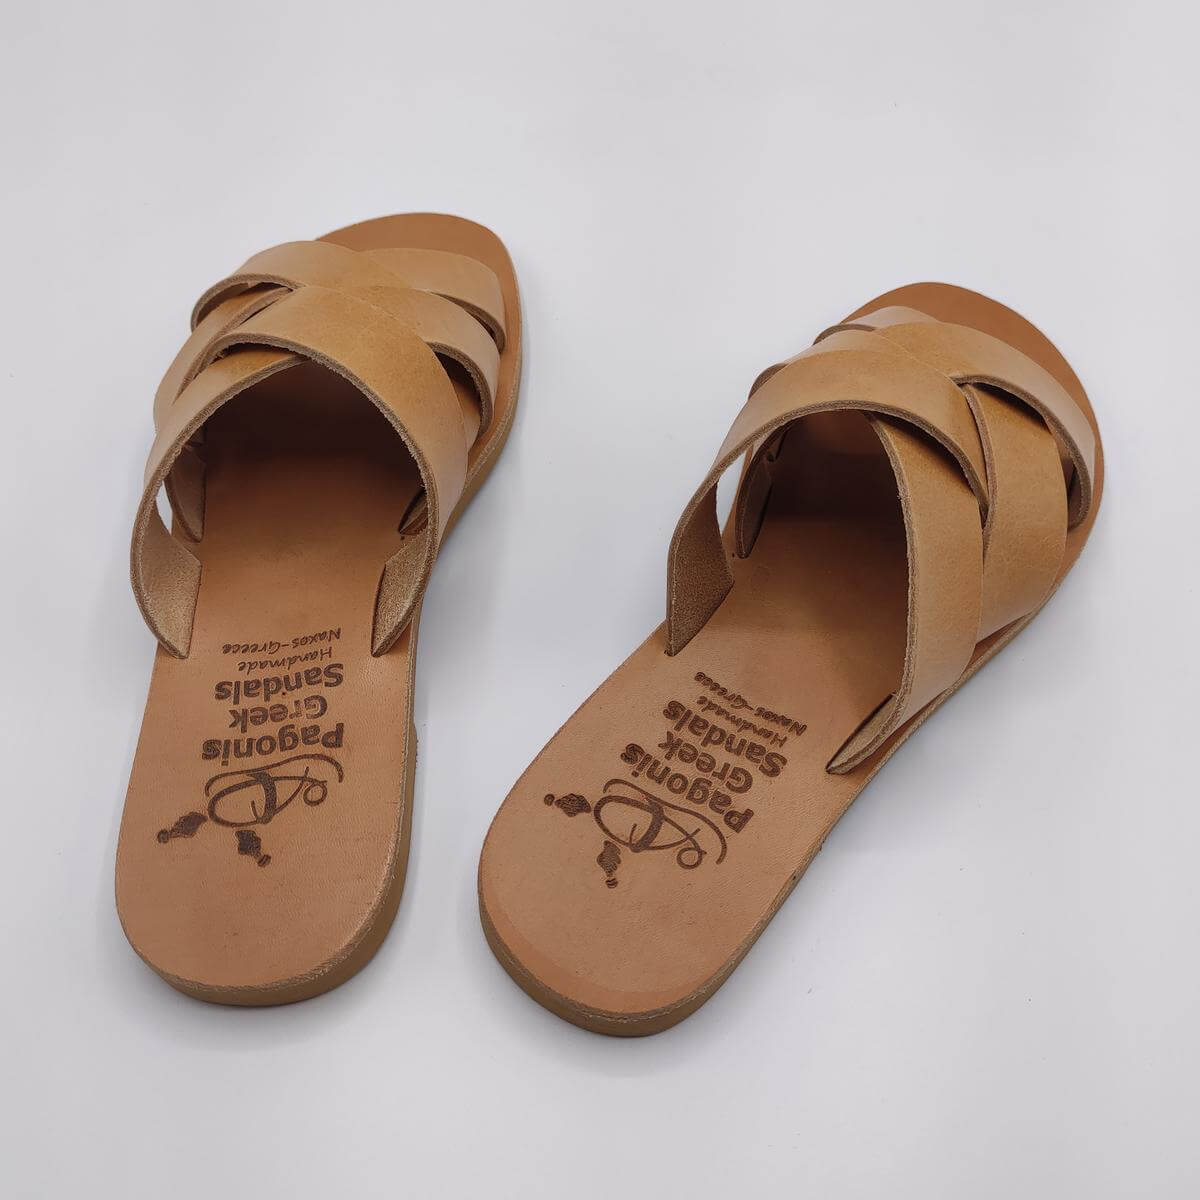 Women's Woven Leather Sandals Natural